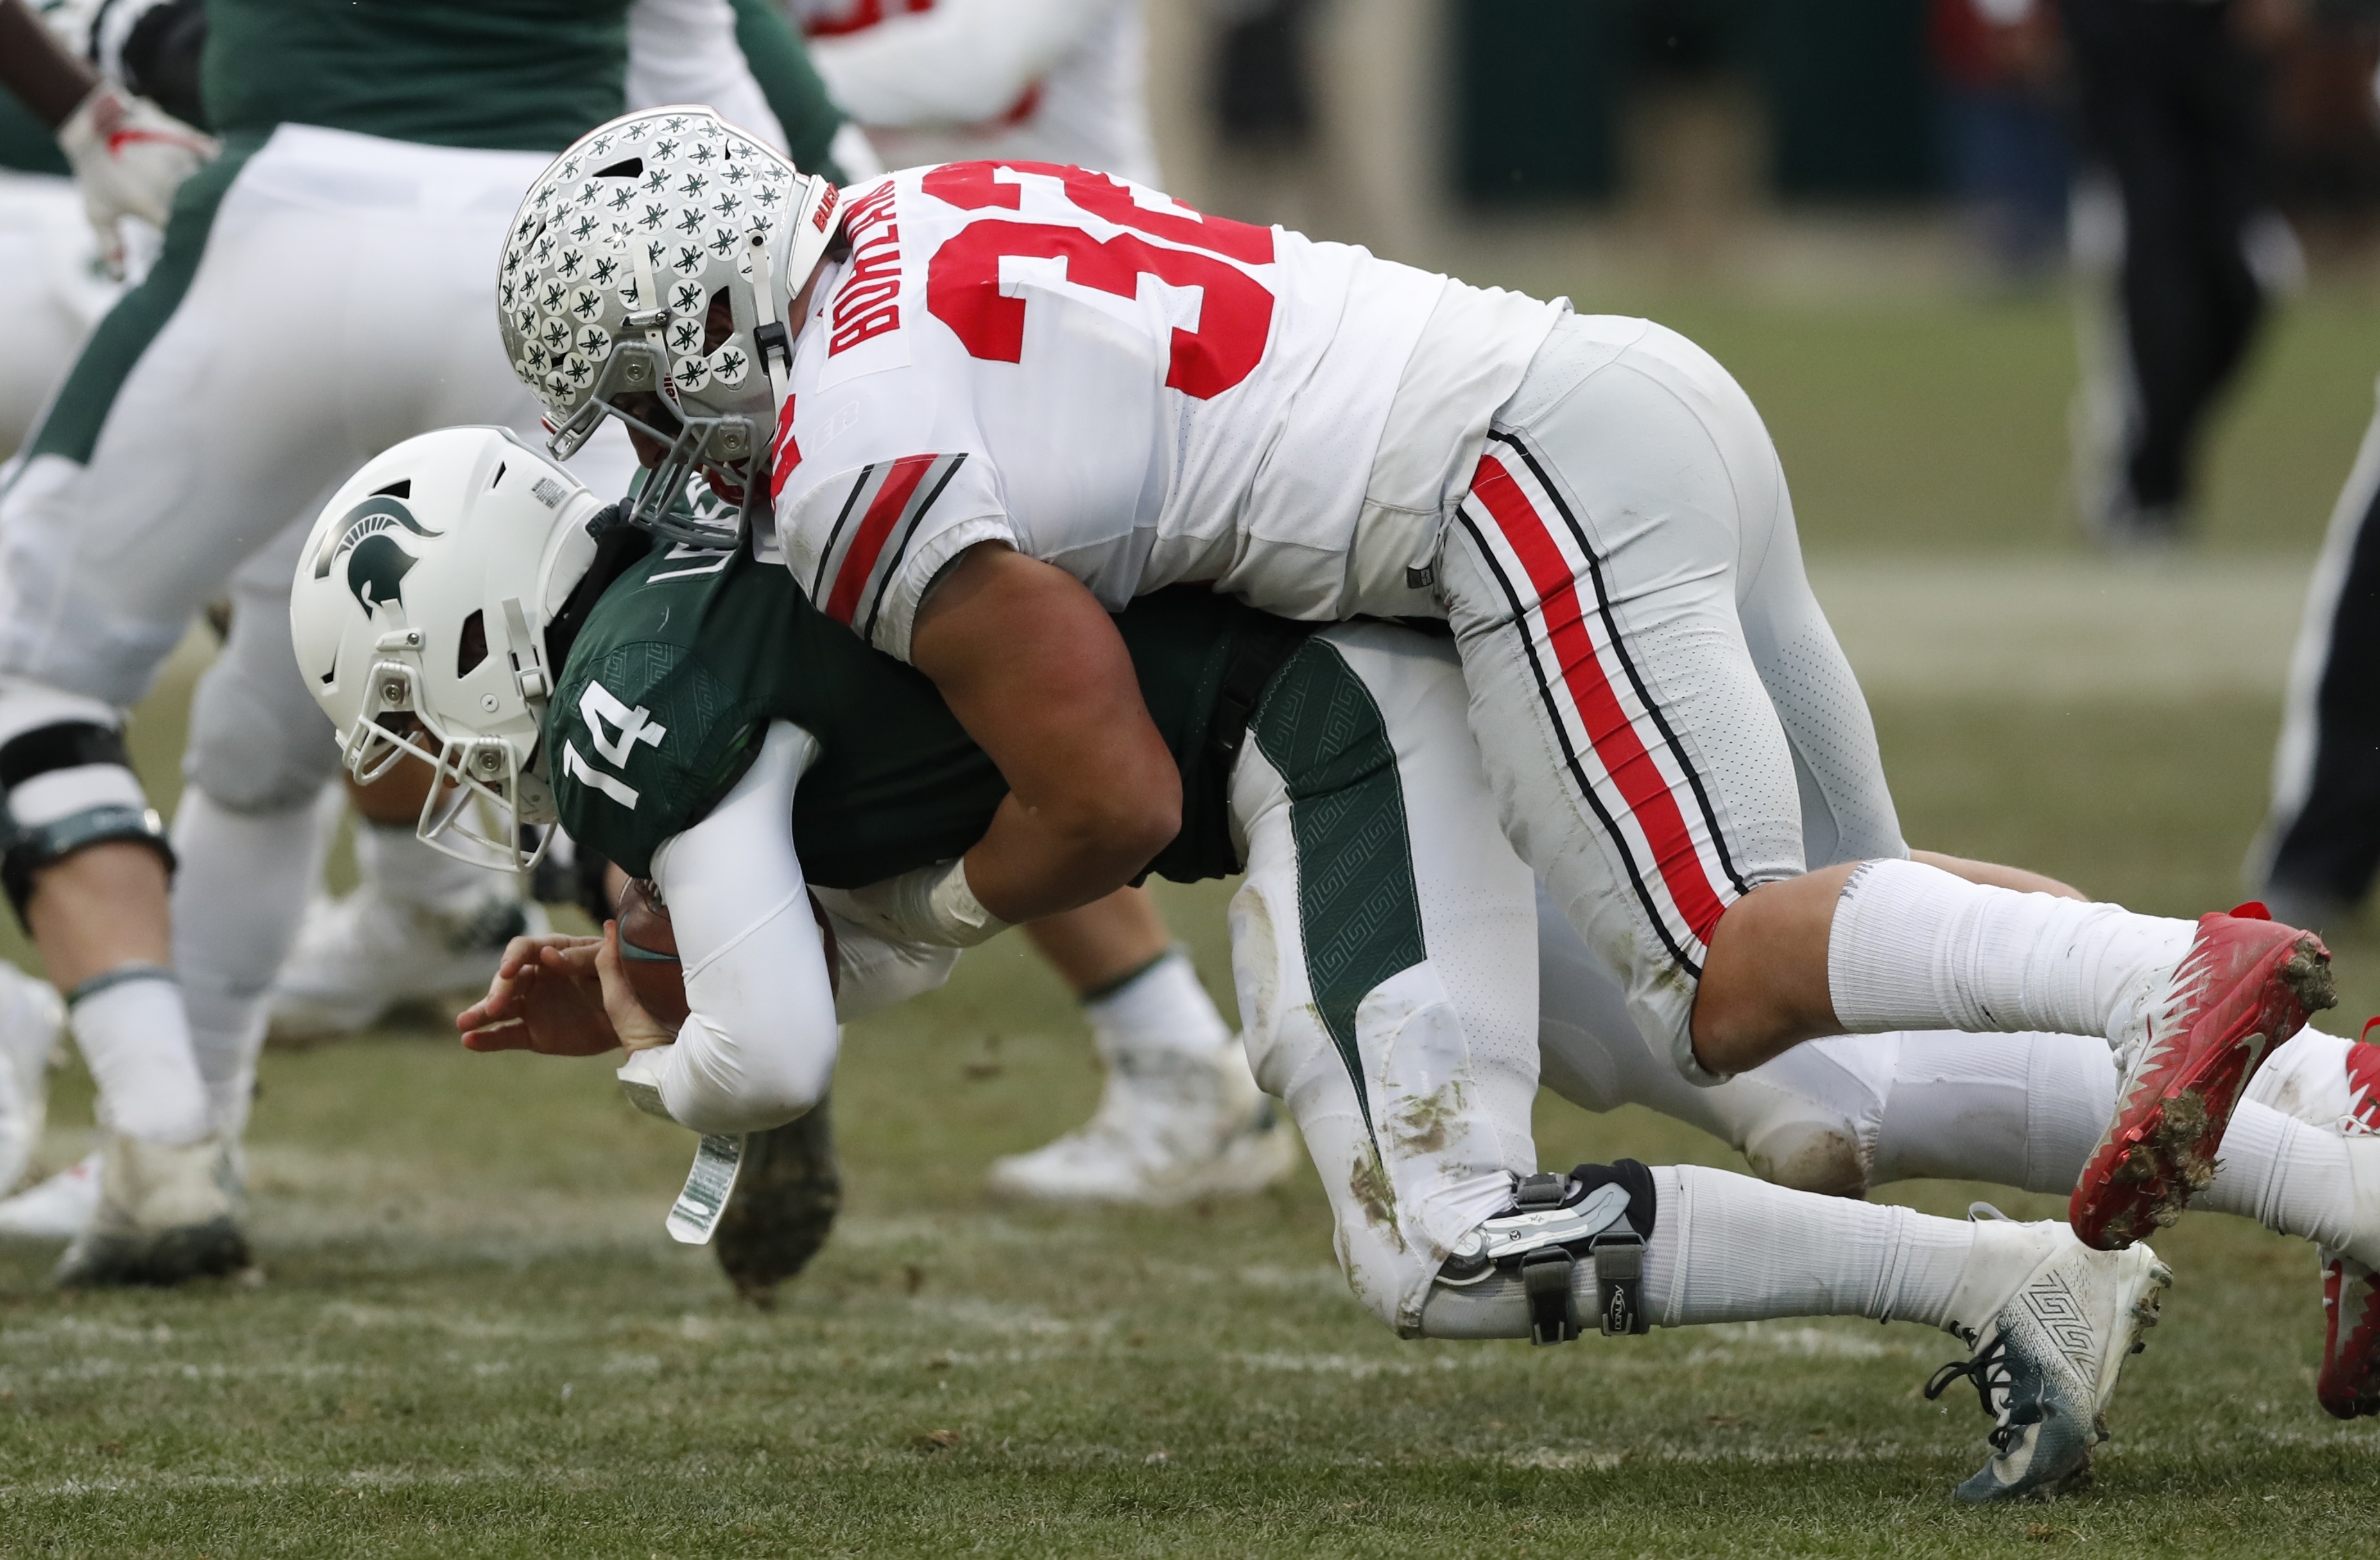 Win over Michigan St a step forward for Buckeyes' defense